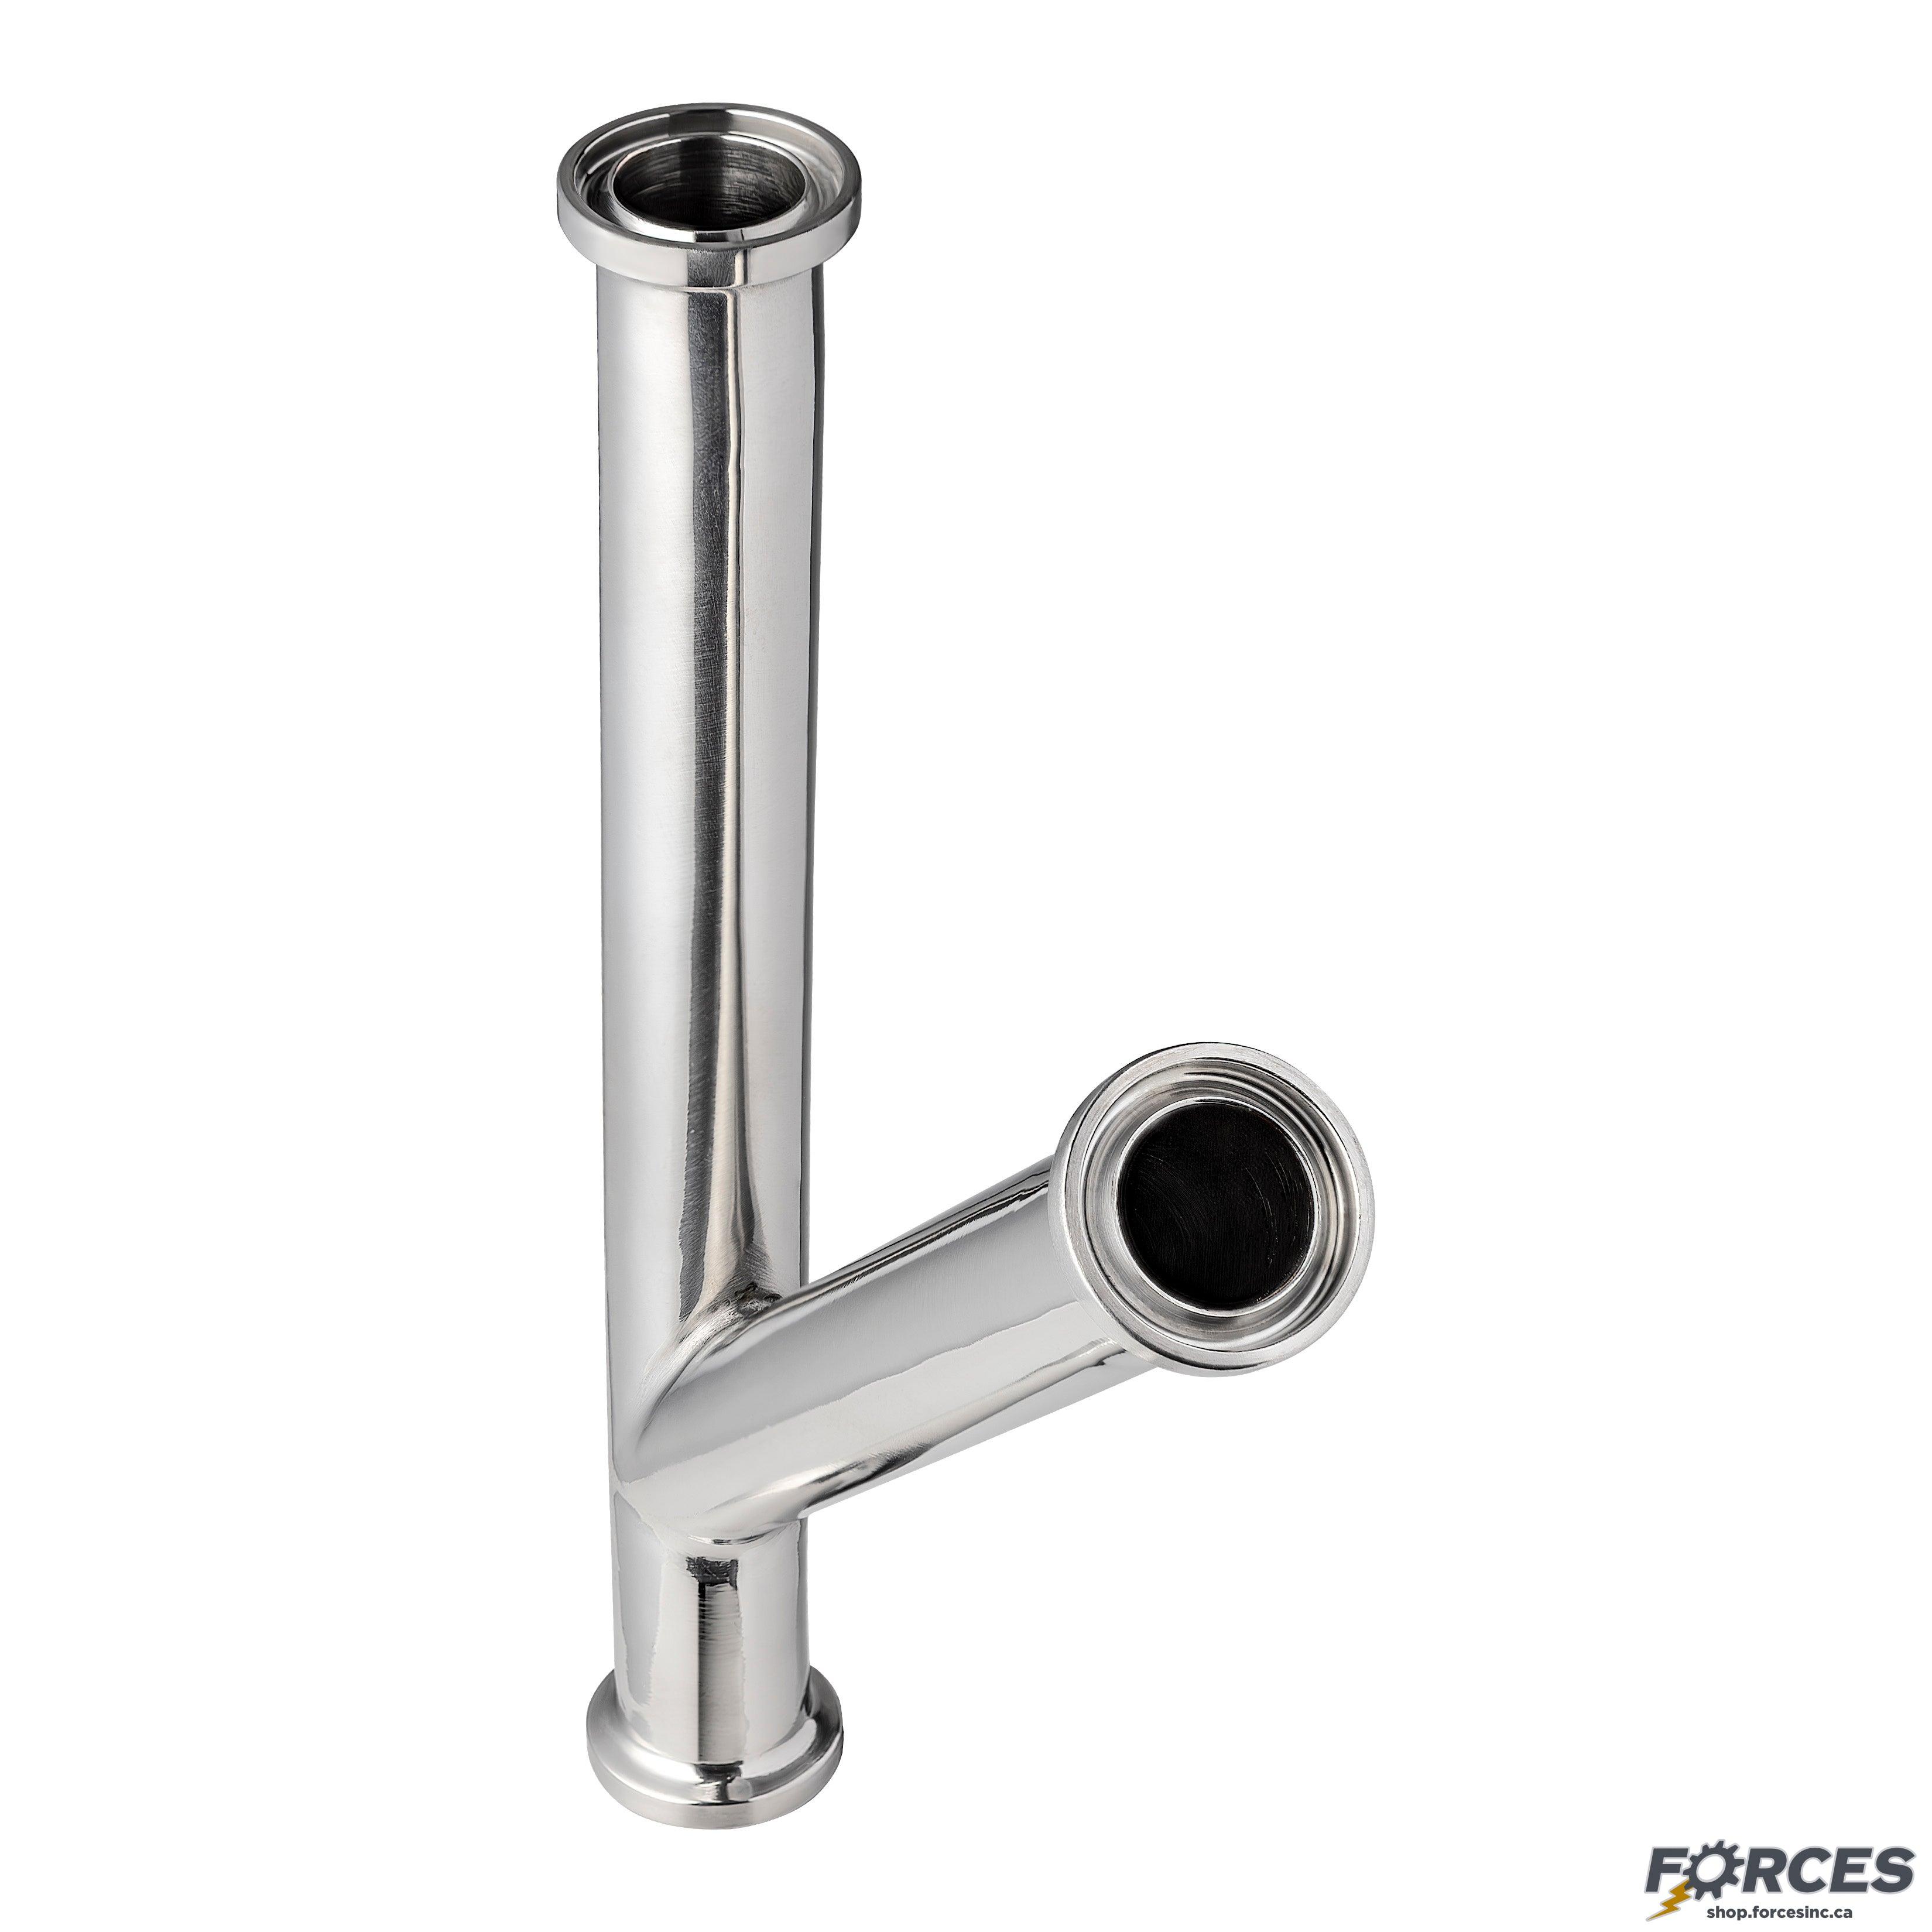 1/2" Tri-Clamp 45° Lateral Wye - Stainless Steel 316 - Forces Inc